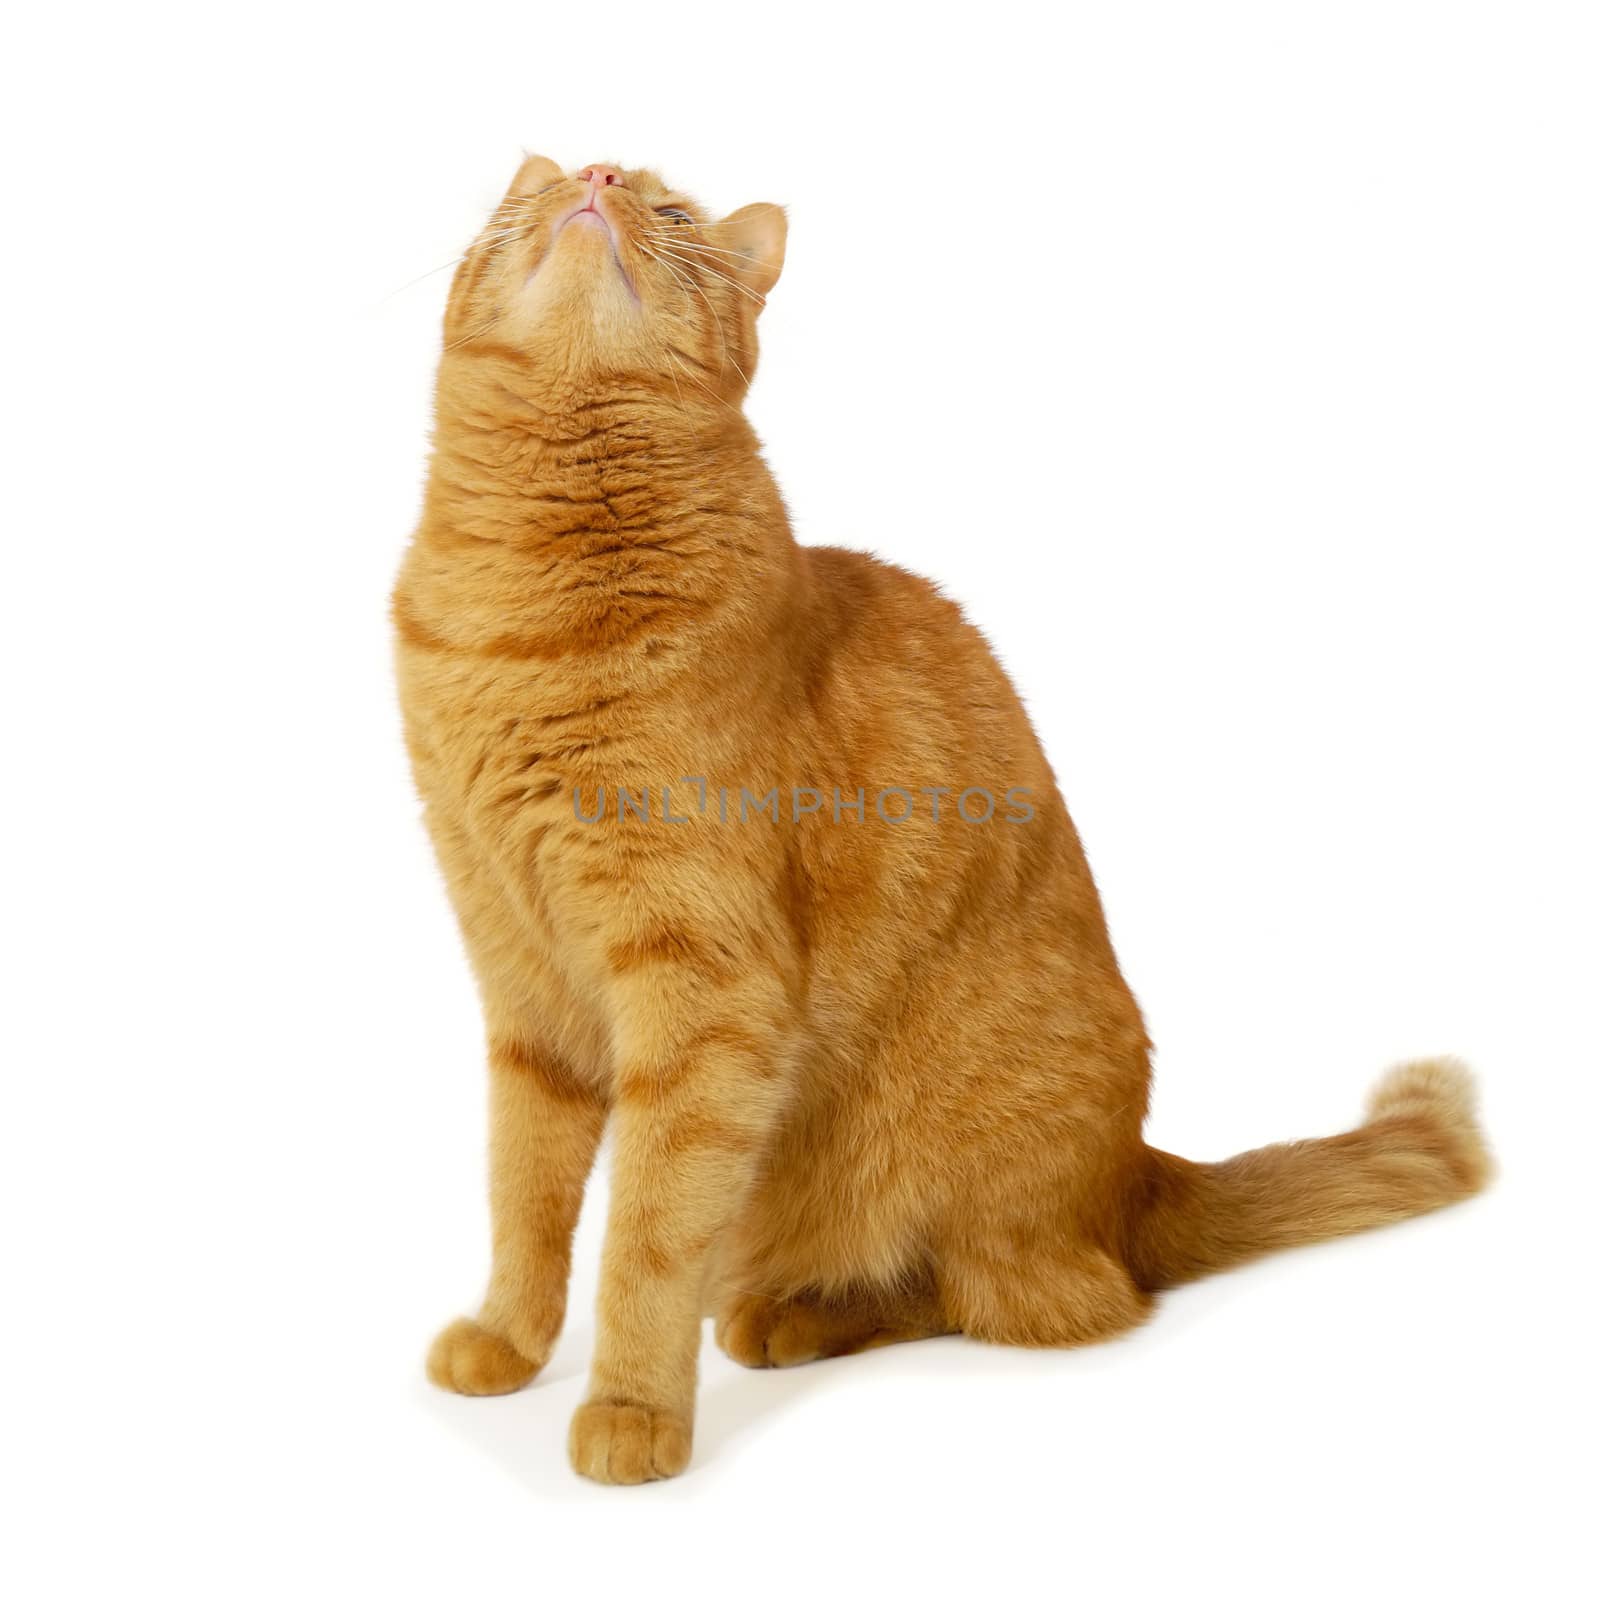 Red cat sitting on a white background